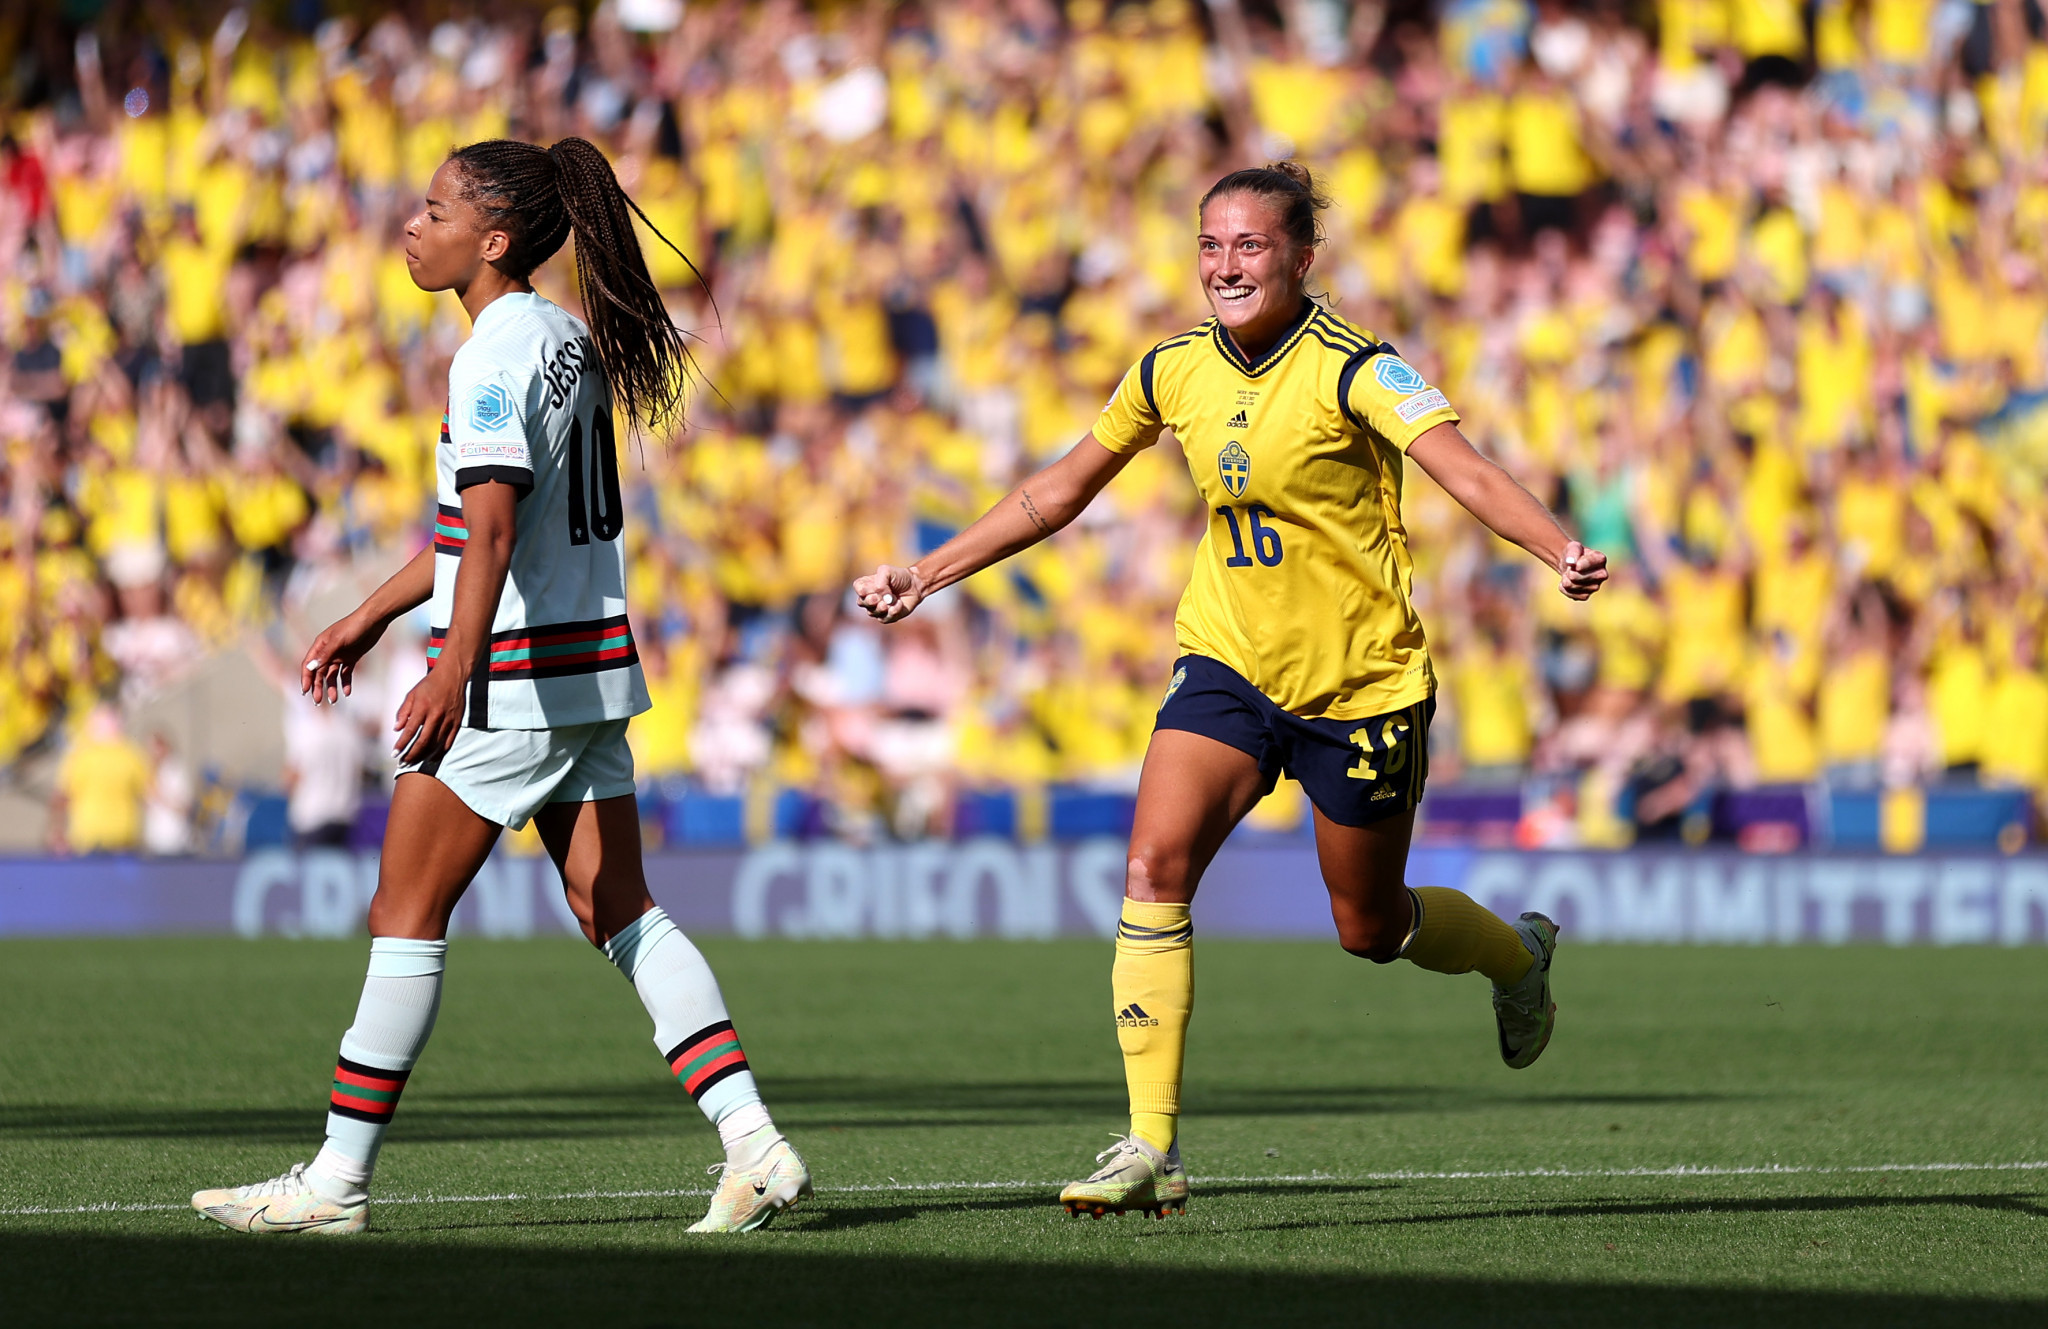 Manchester City’s Filippa Angeldahl scored a brace for Sweden against Portugal ©Getty Images